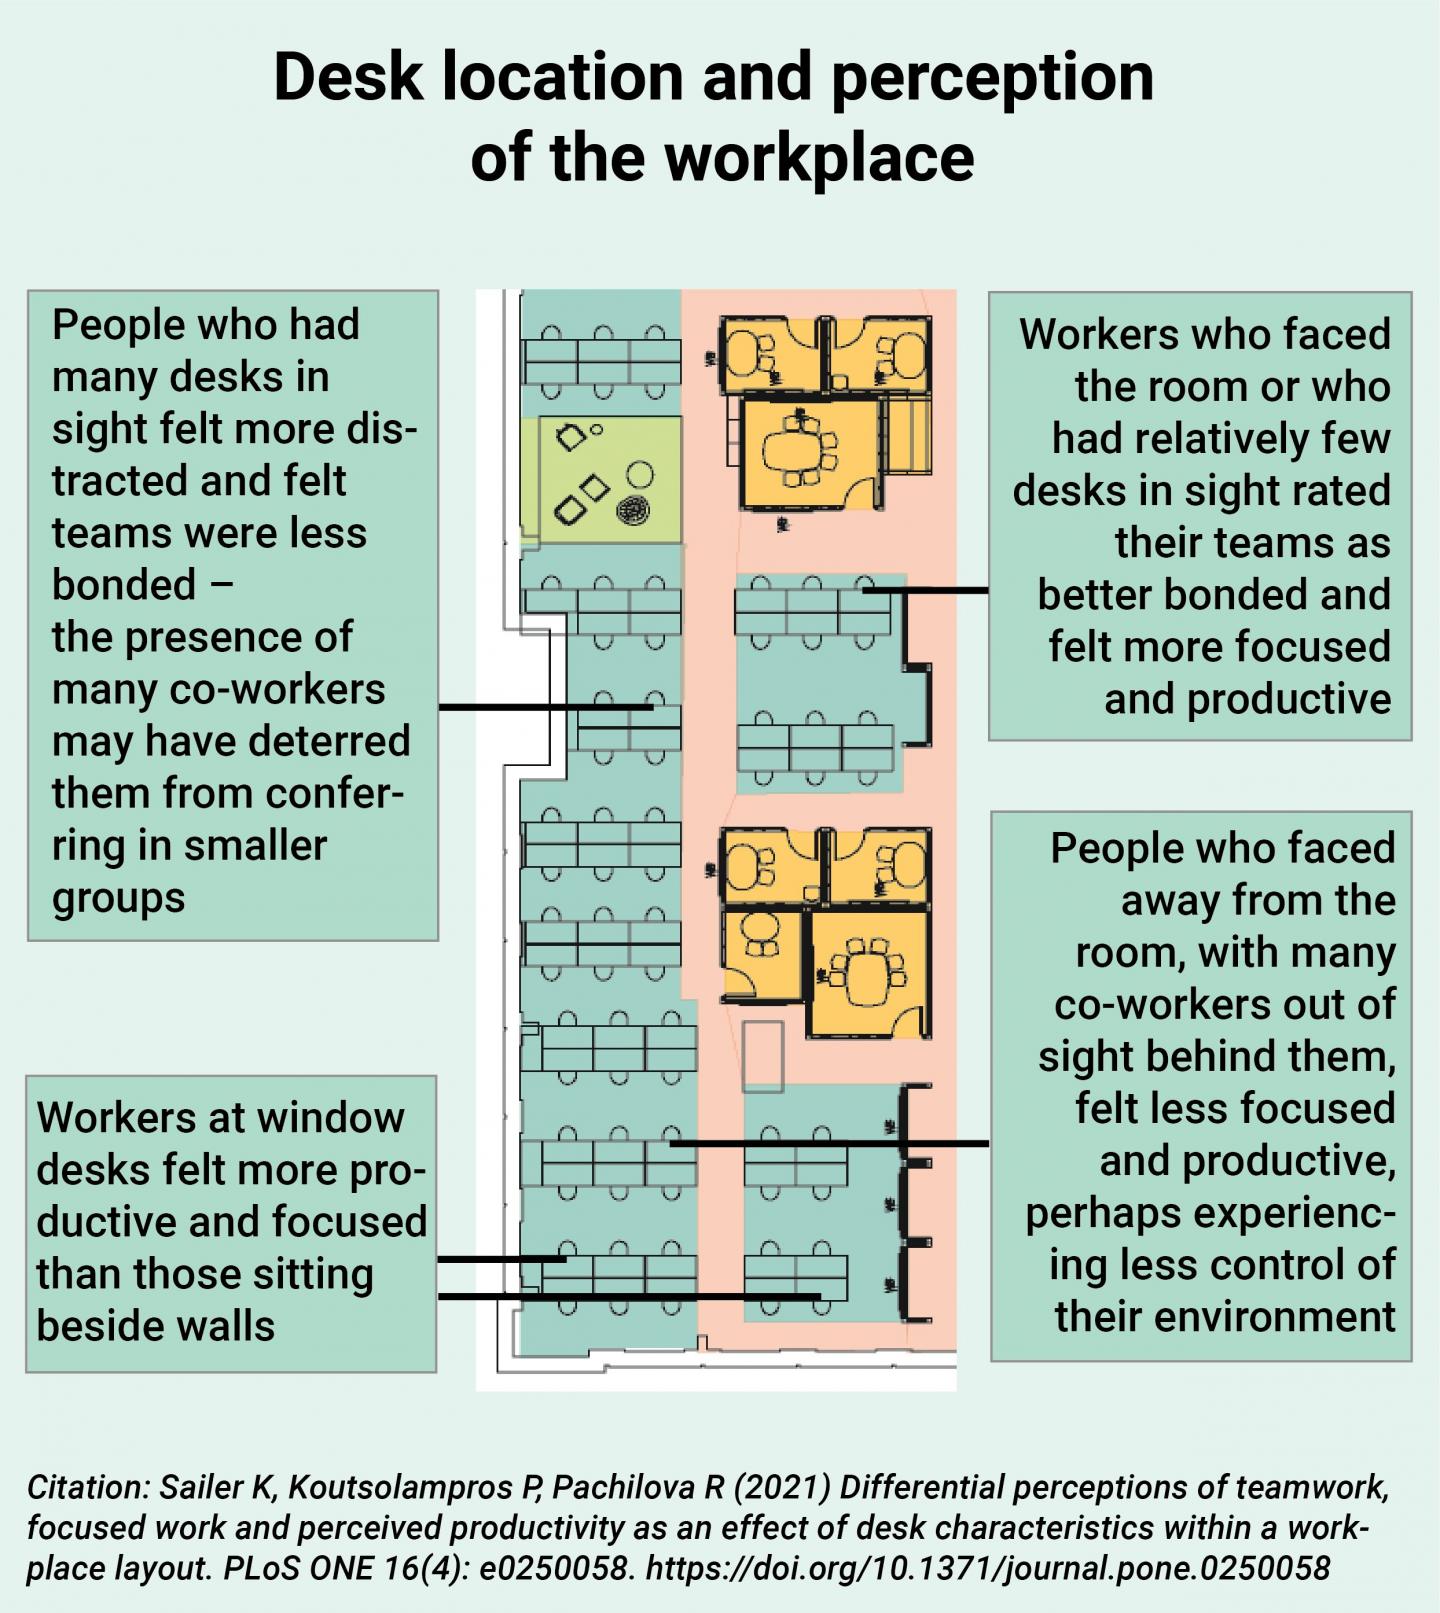 Best desk locations in an open-plan office grant visual control over the environment